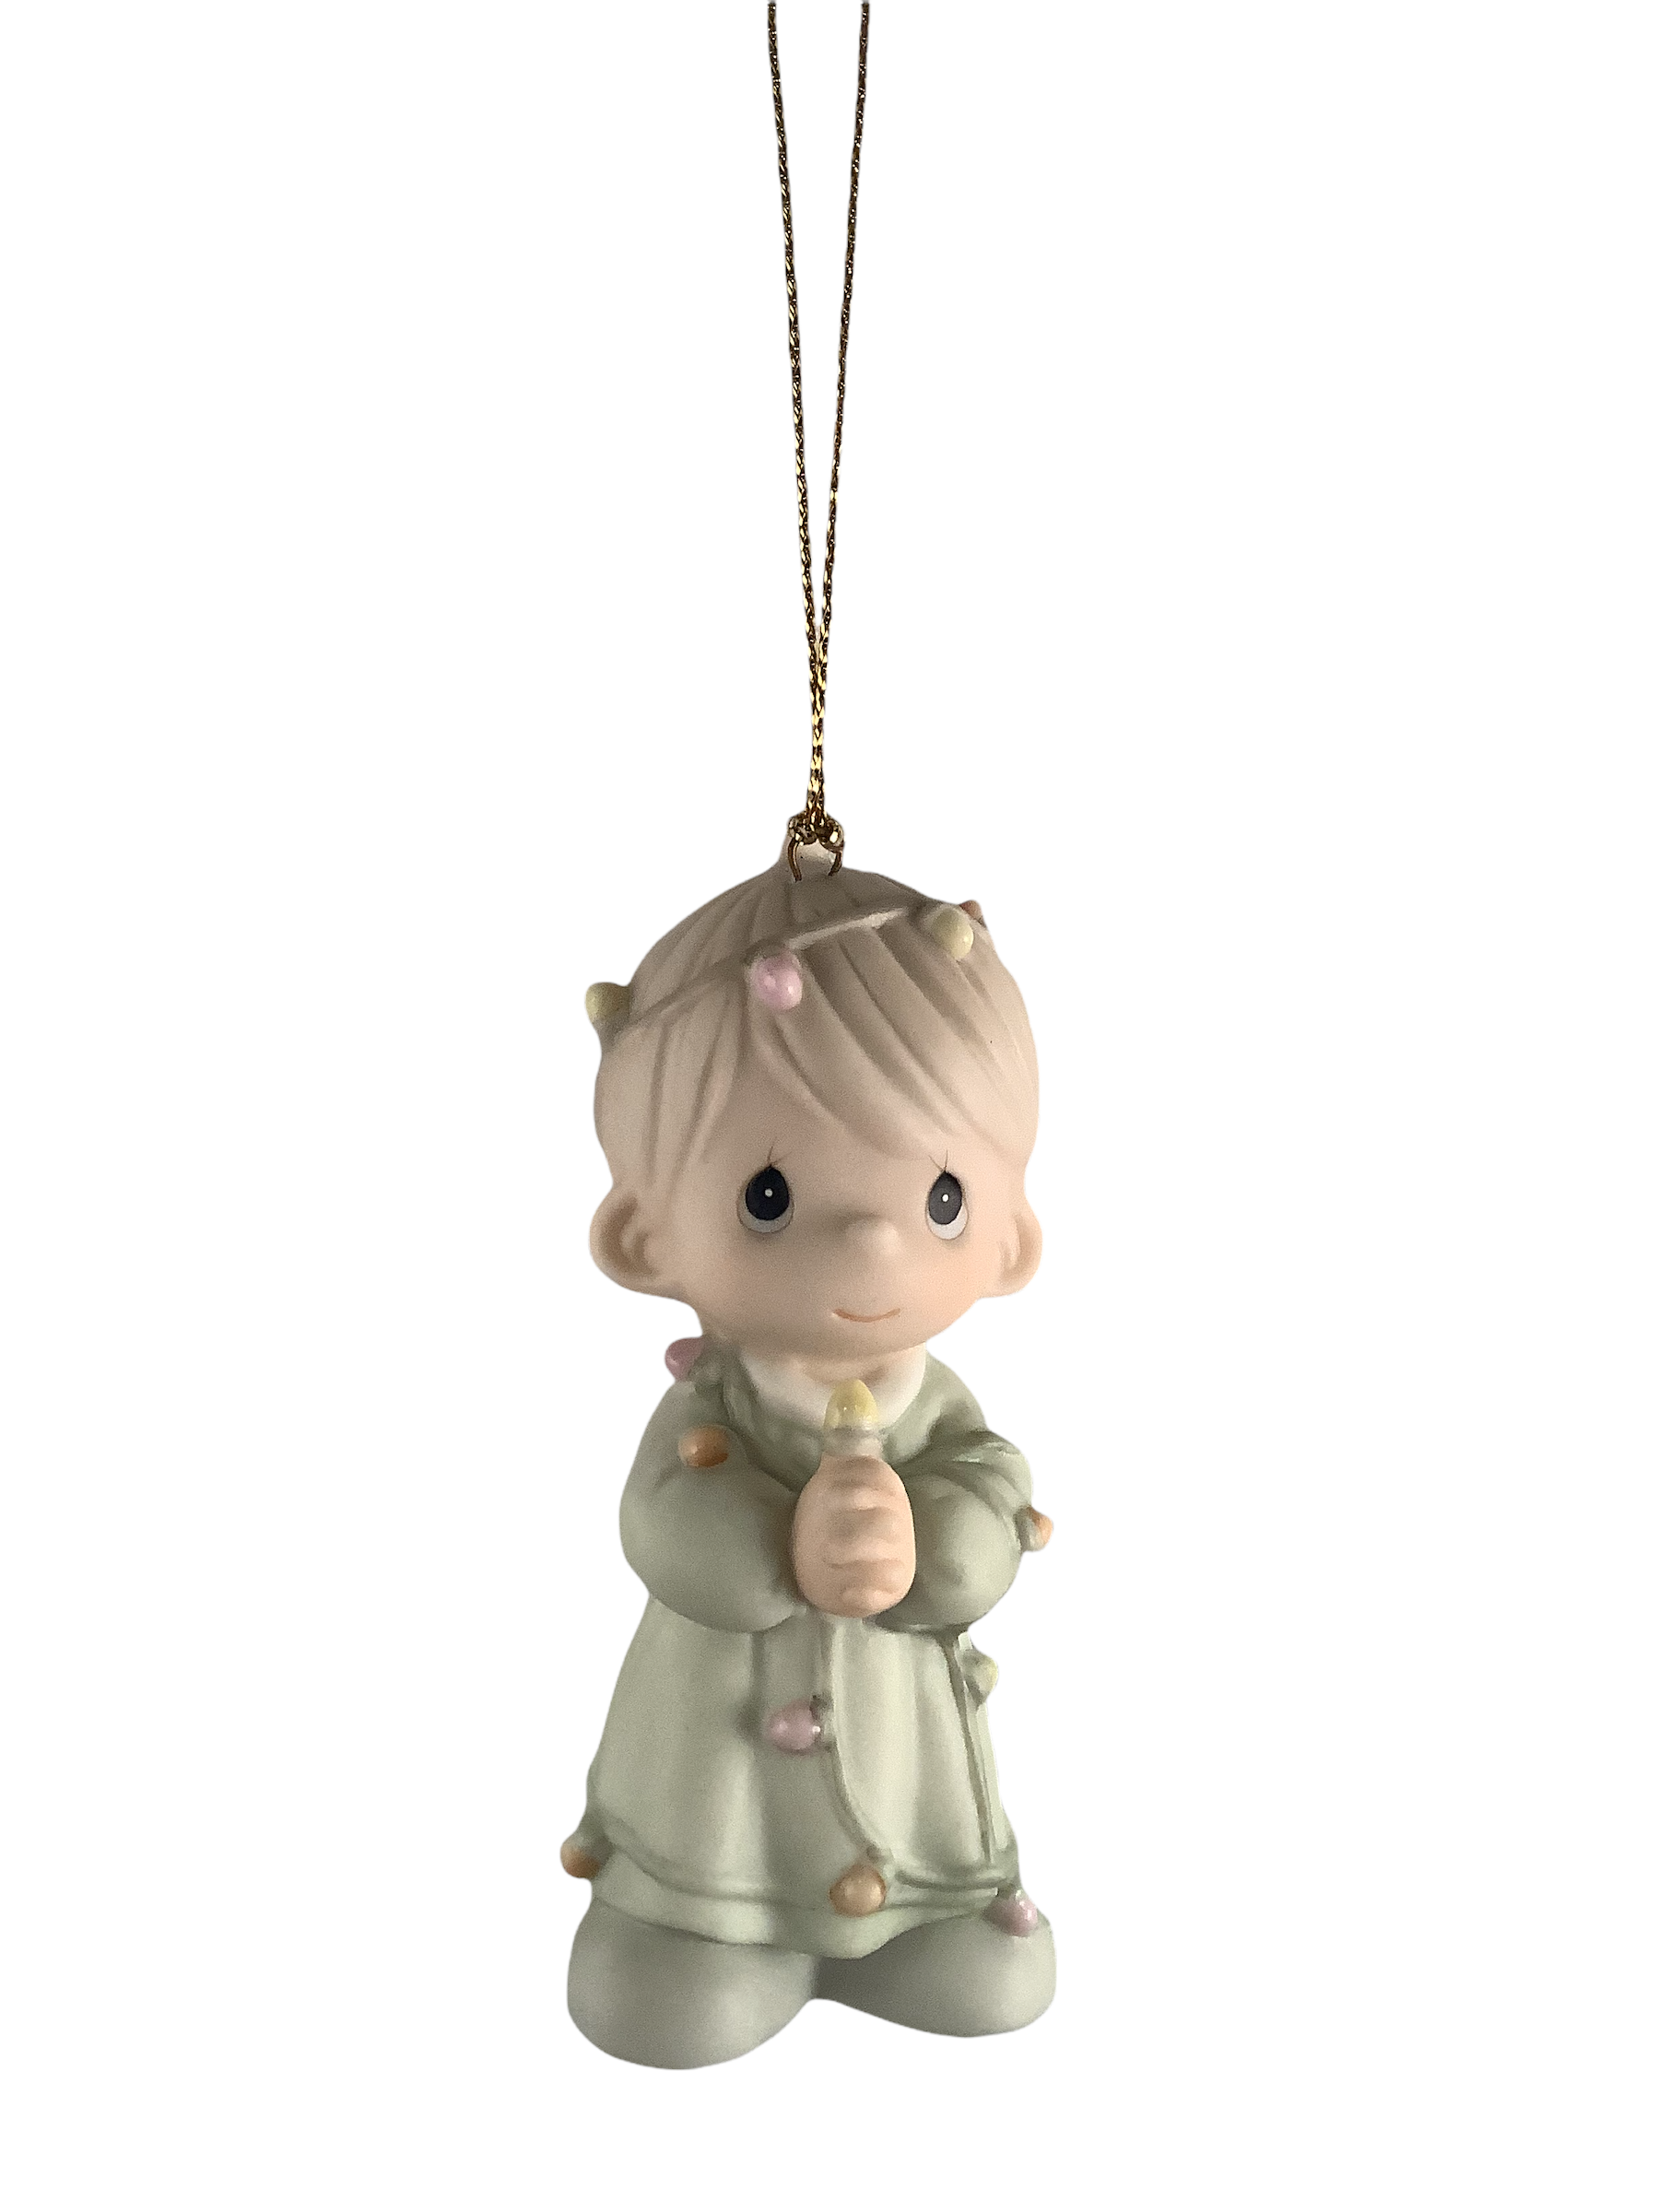 May Your Christmas Be Delightful - Precious Moment Ornament